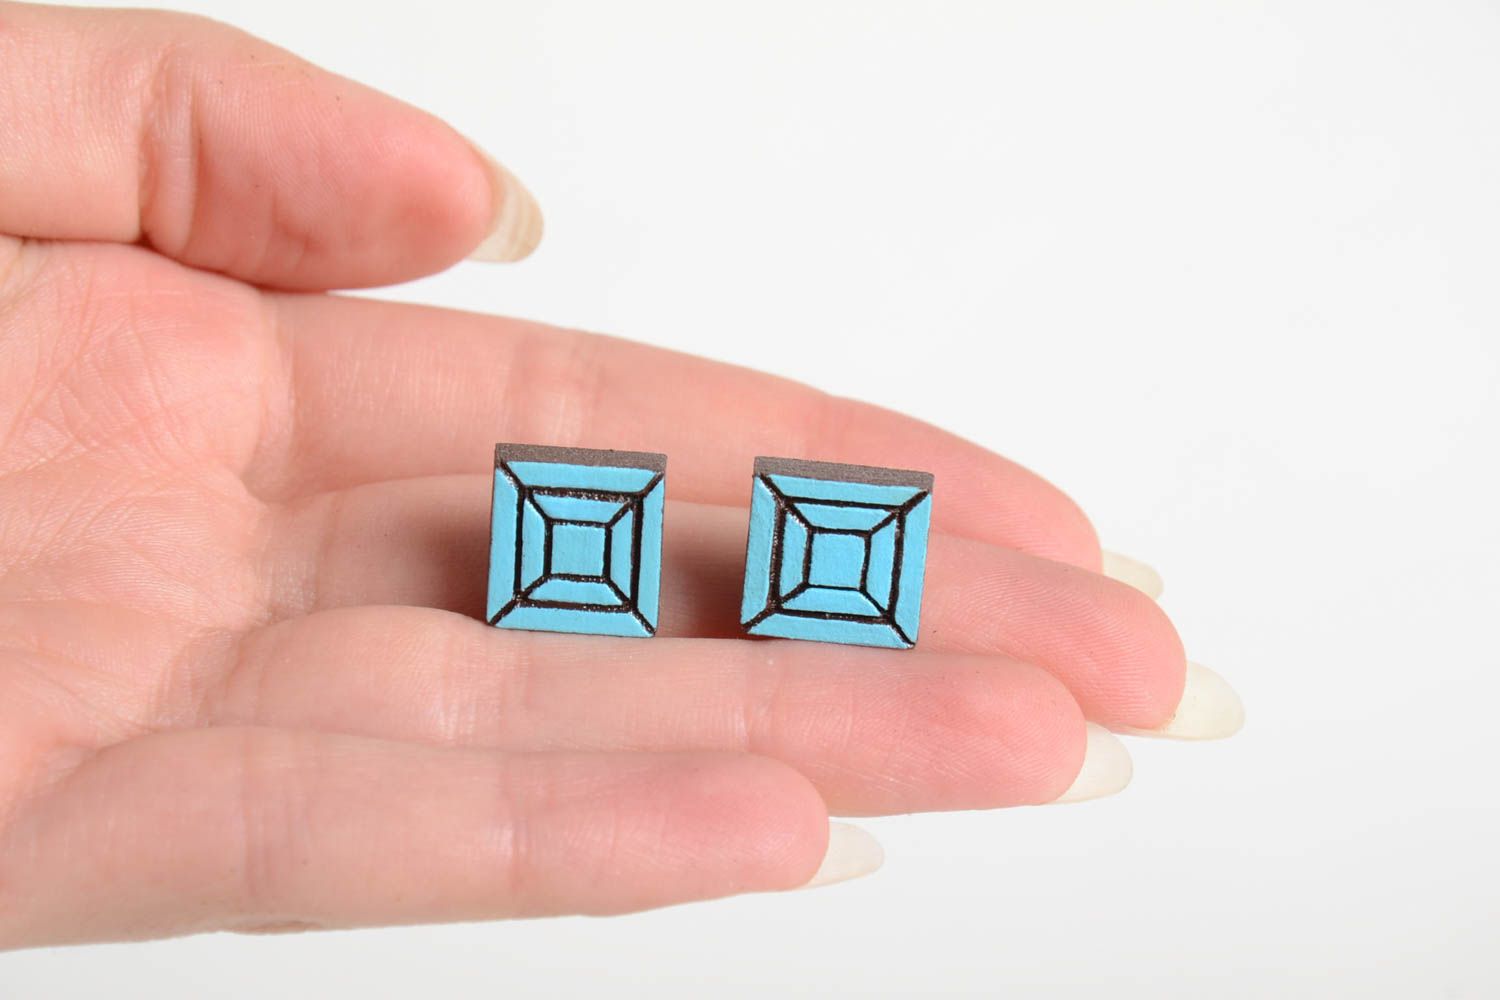 Handmade wooden stud earrings artisan jewelry fashion accessories for girls photo 2